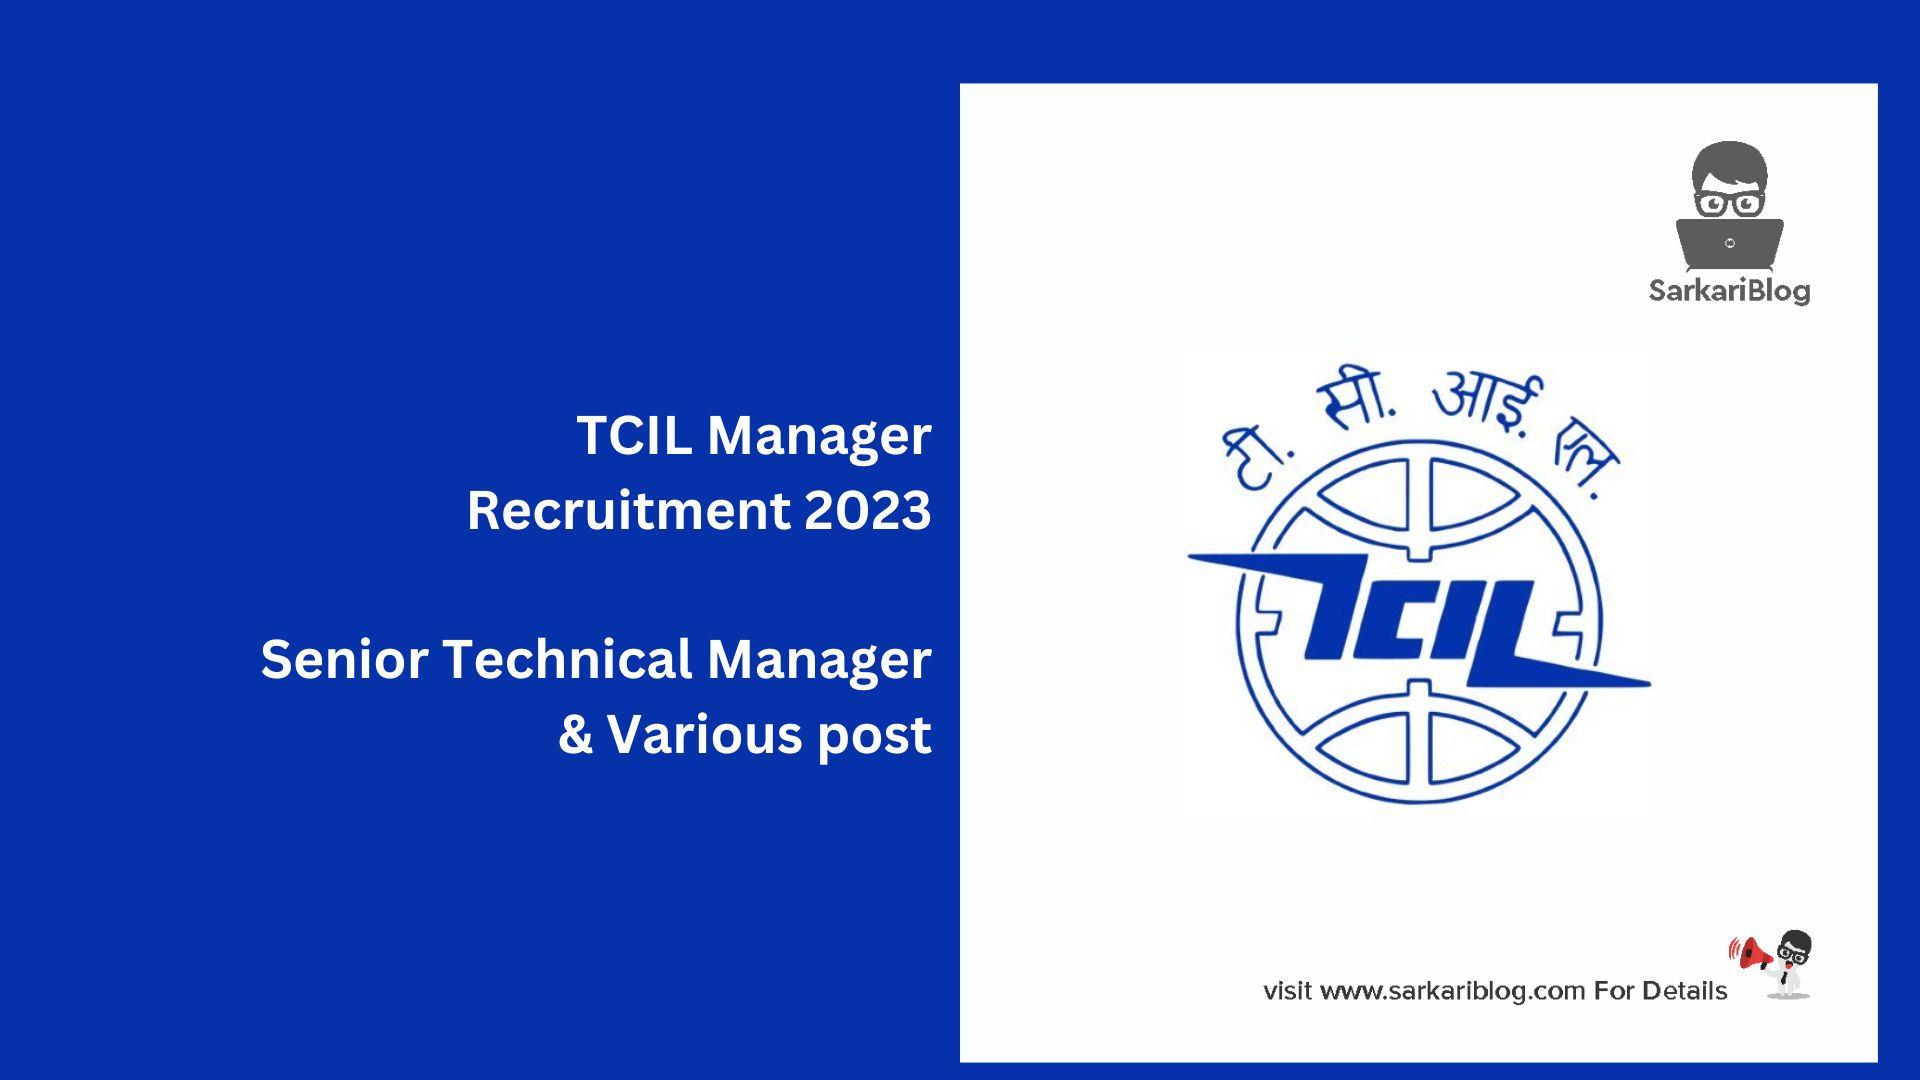 TCIL Manager Recruitment 2023